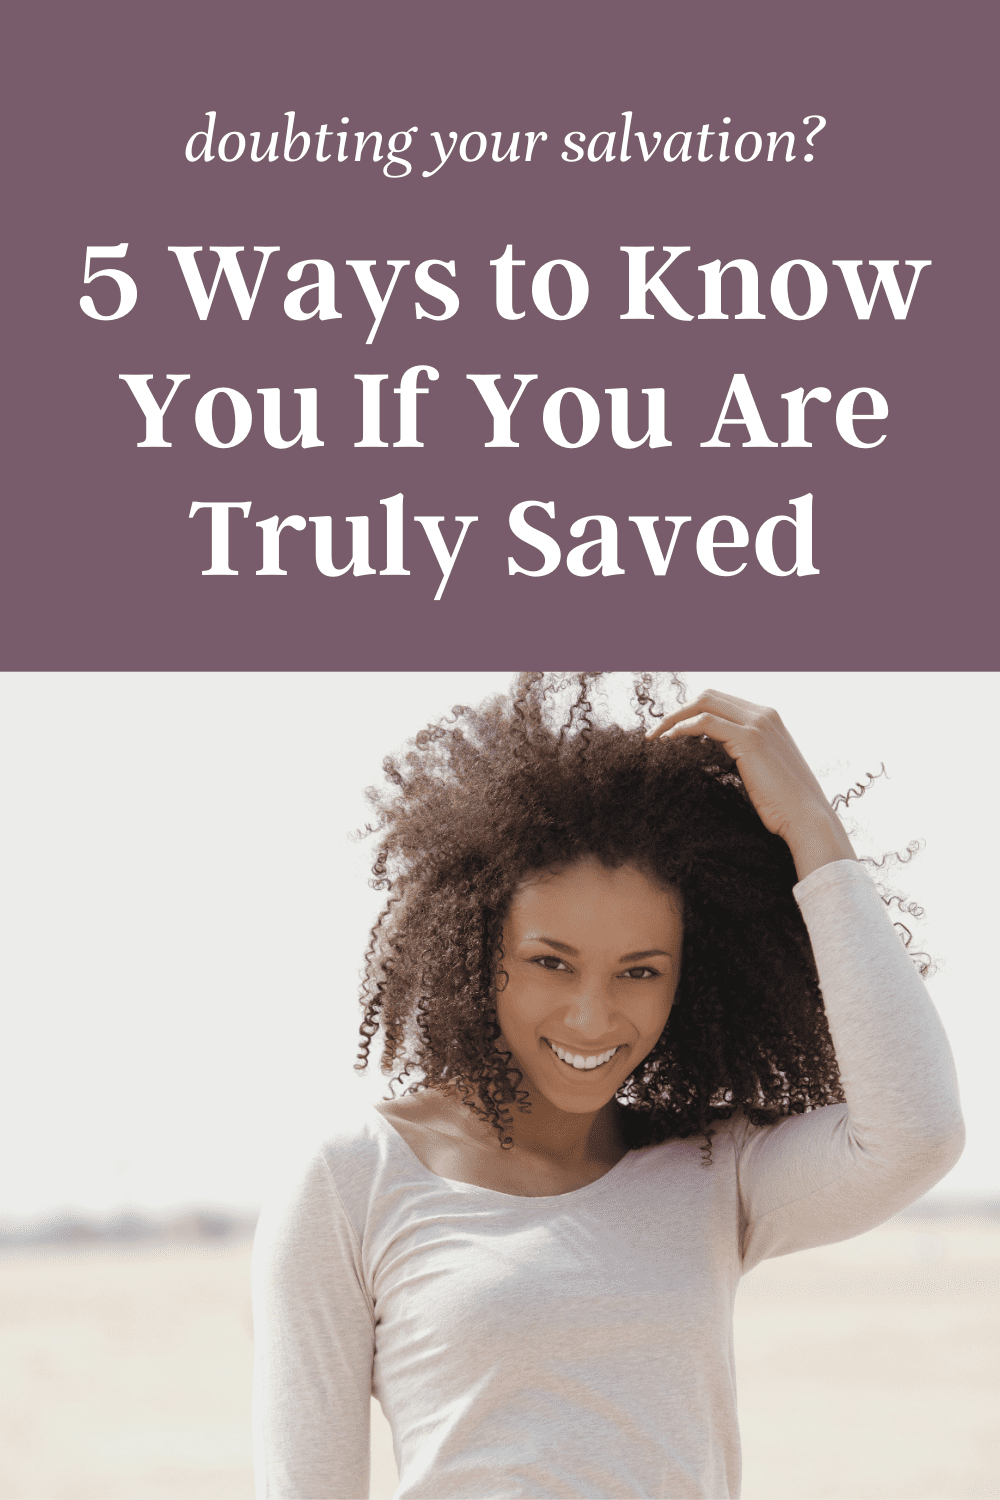 Are you tired of wondering if you are truly saved? Learn 5 ways to stop doubting your salvation and find assurance of your faith - without having to worry about falling out of favor with God when you make a mistake. Plus, tips about how to know if you are growing closer to God and stronger in your faith.